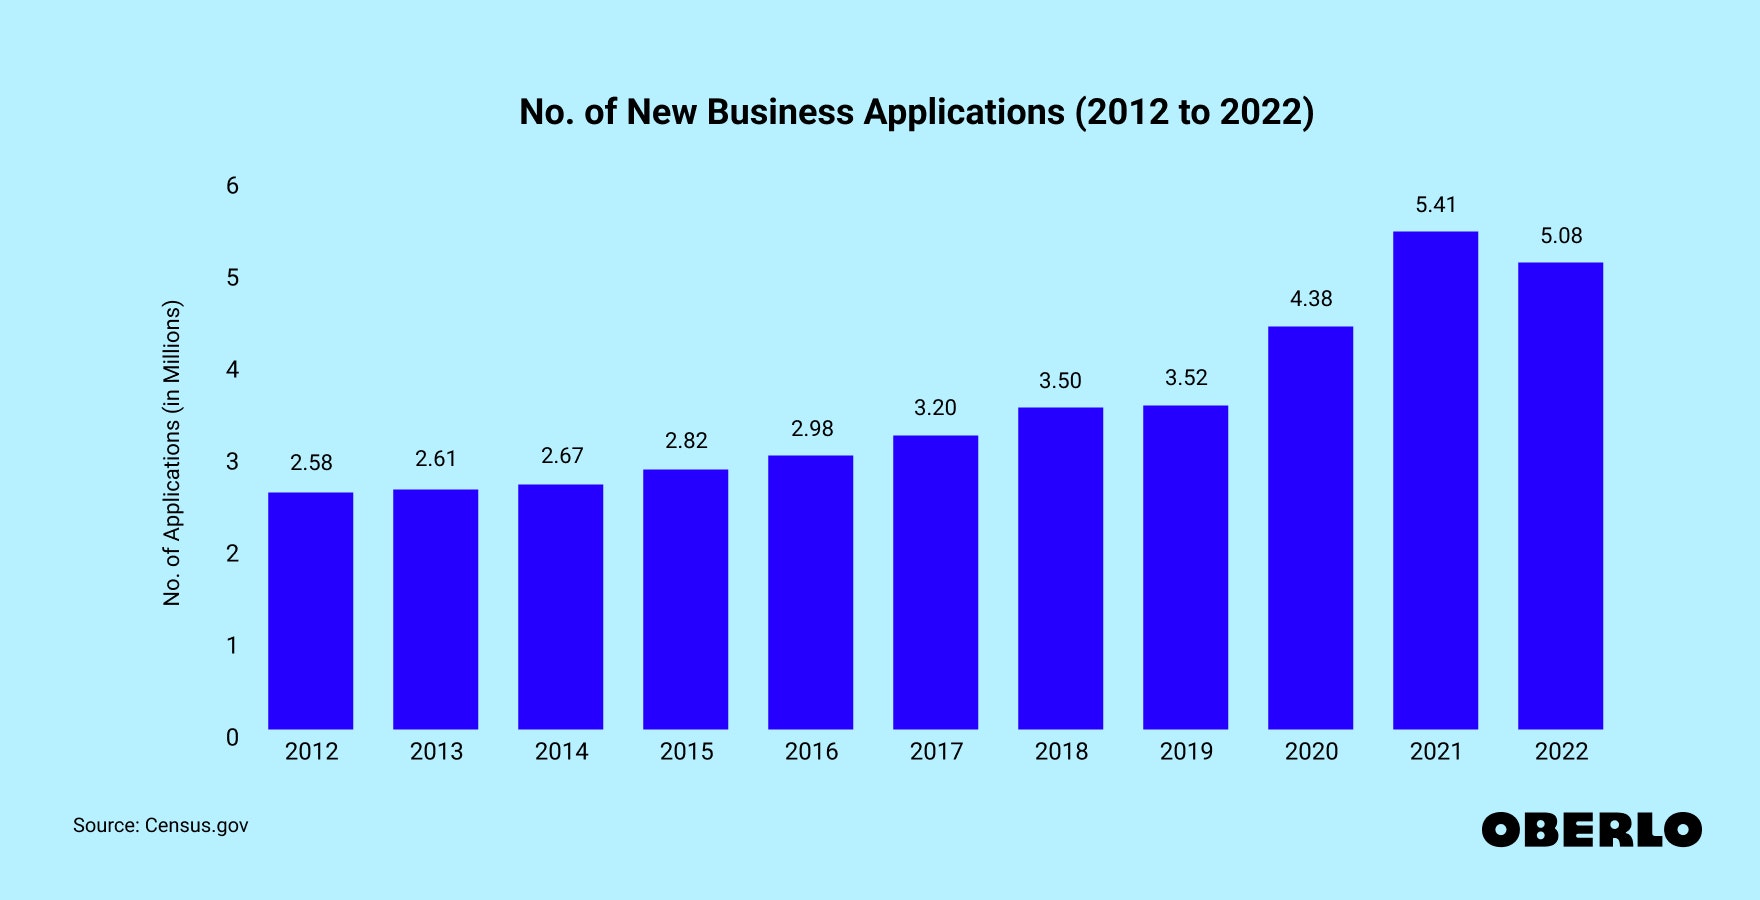 Chart showing the no. of new business applications from 2012 to 2022